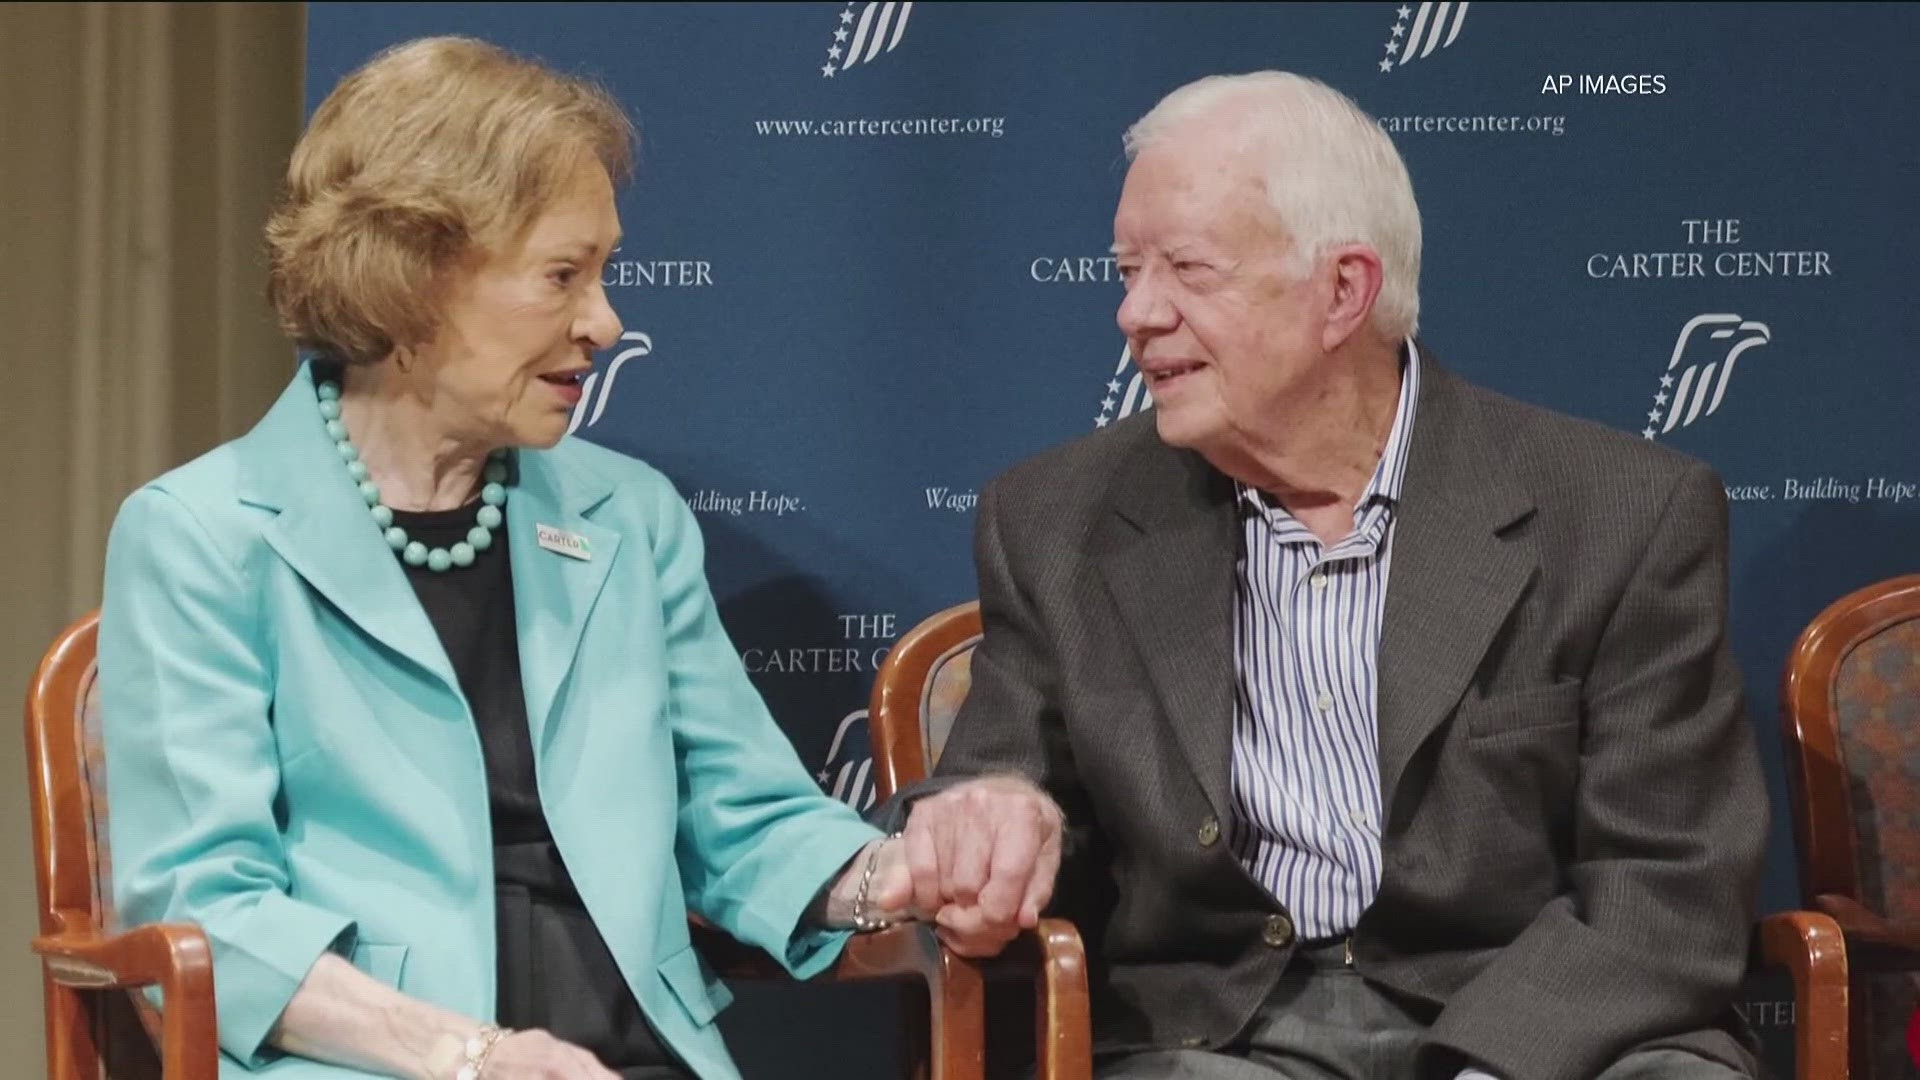 Here's how The Carter Center celebrated the former president's birthday.